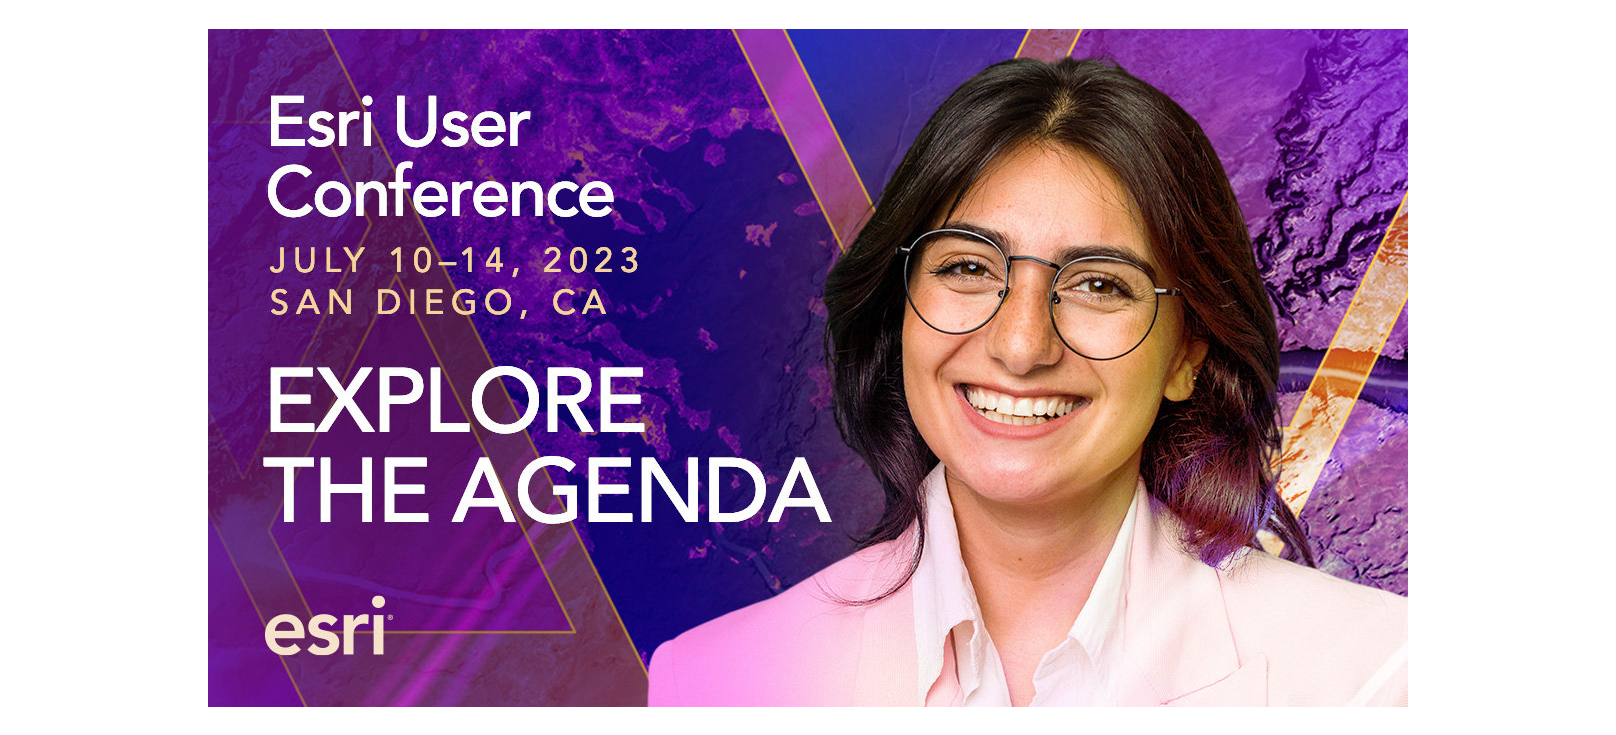 Woman in glasses smiling with a colorful background listing the dates of the user conference and text that says Explore the Agenda